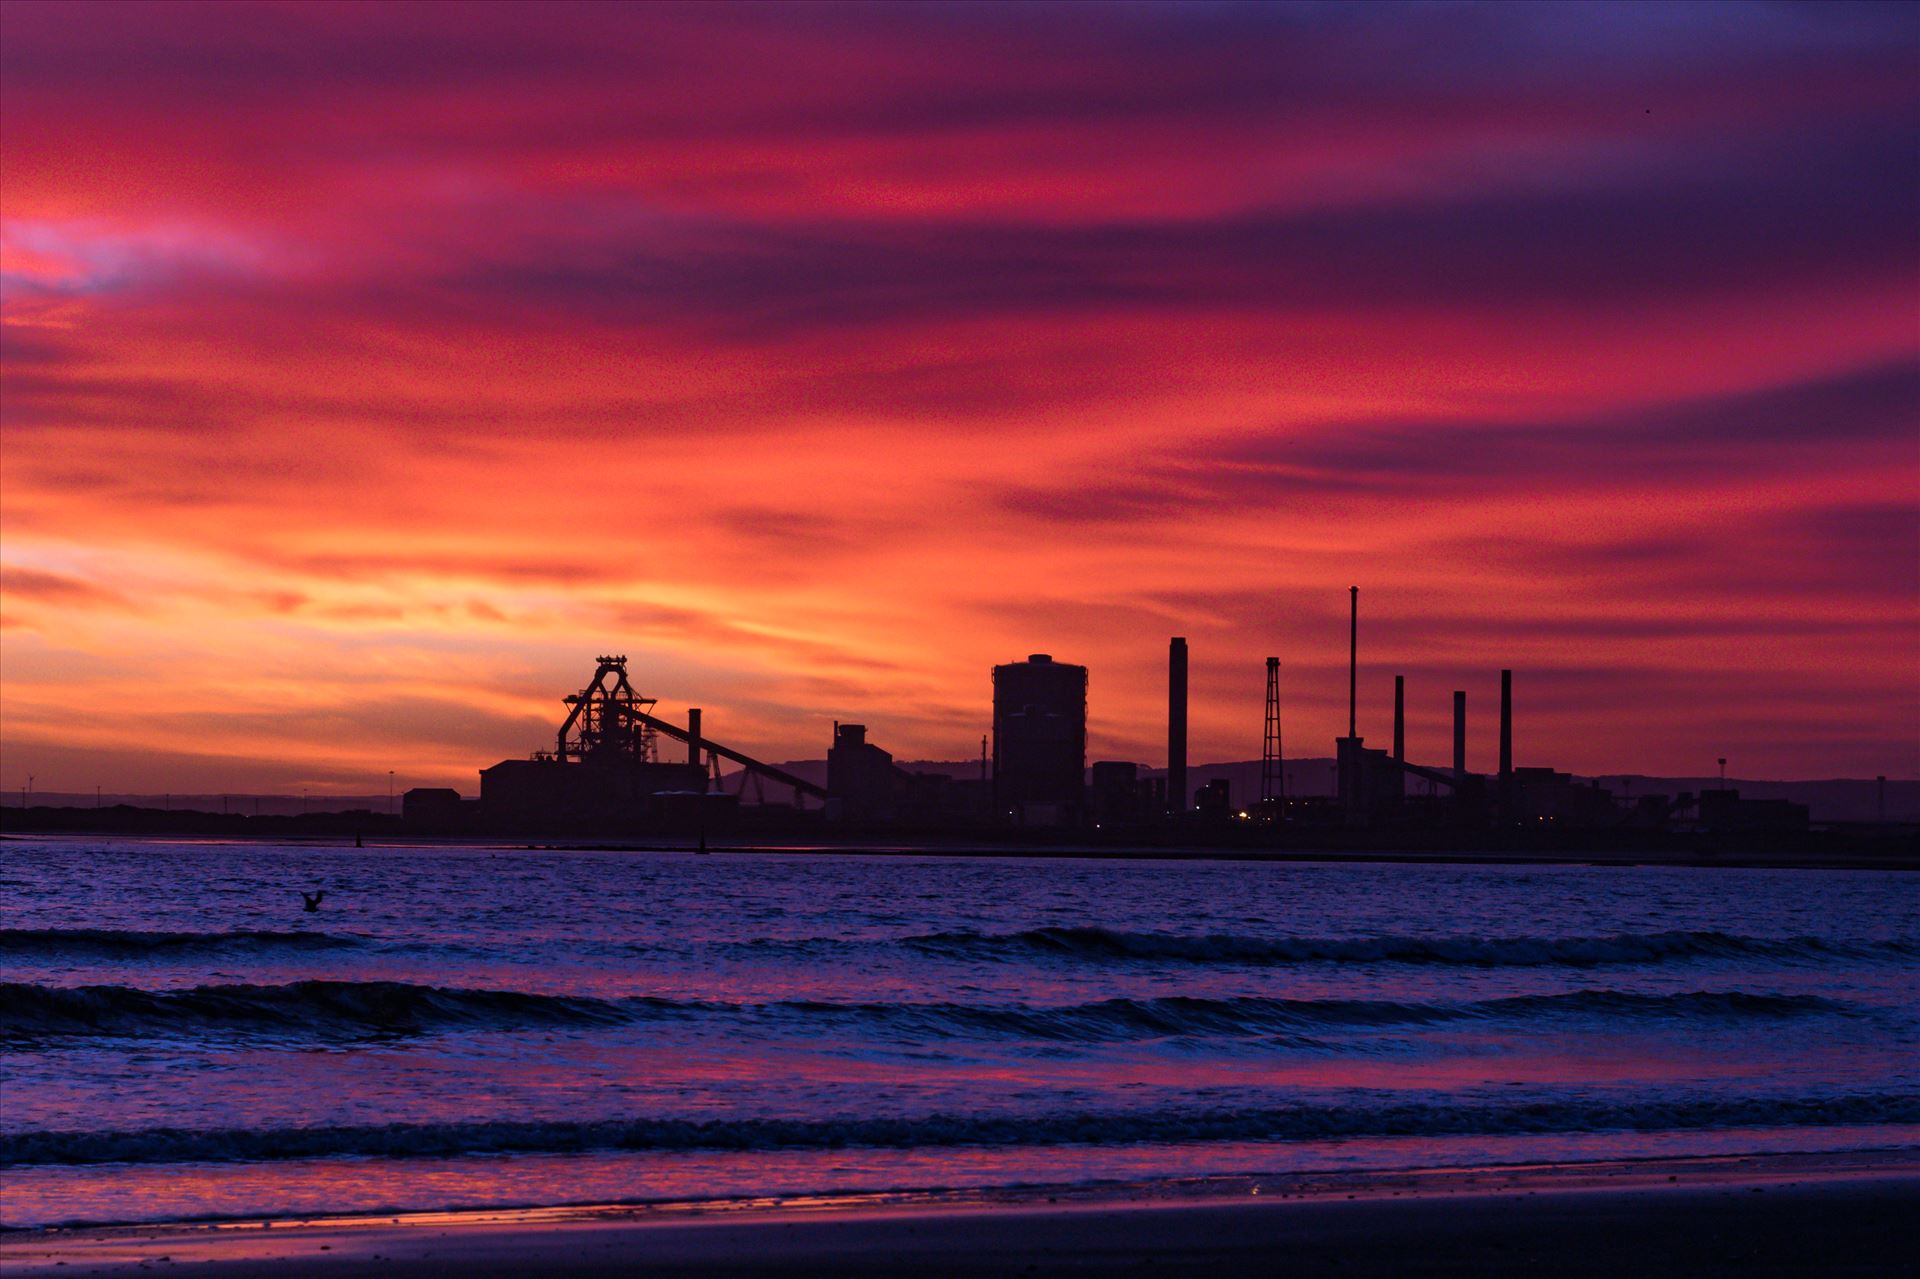 SSI Redcar Steel Works Sunrise, Red sky in the Morning - Taken on the 2/01/18 on a very cold Seaton Beach looking over the river to SSI Redcar Steel Works by AJ Stoves Photography